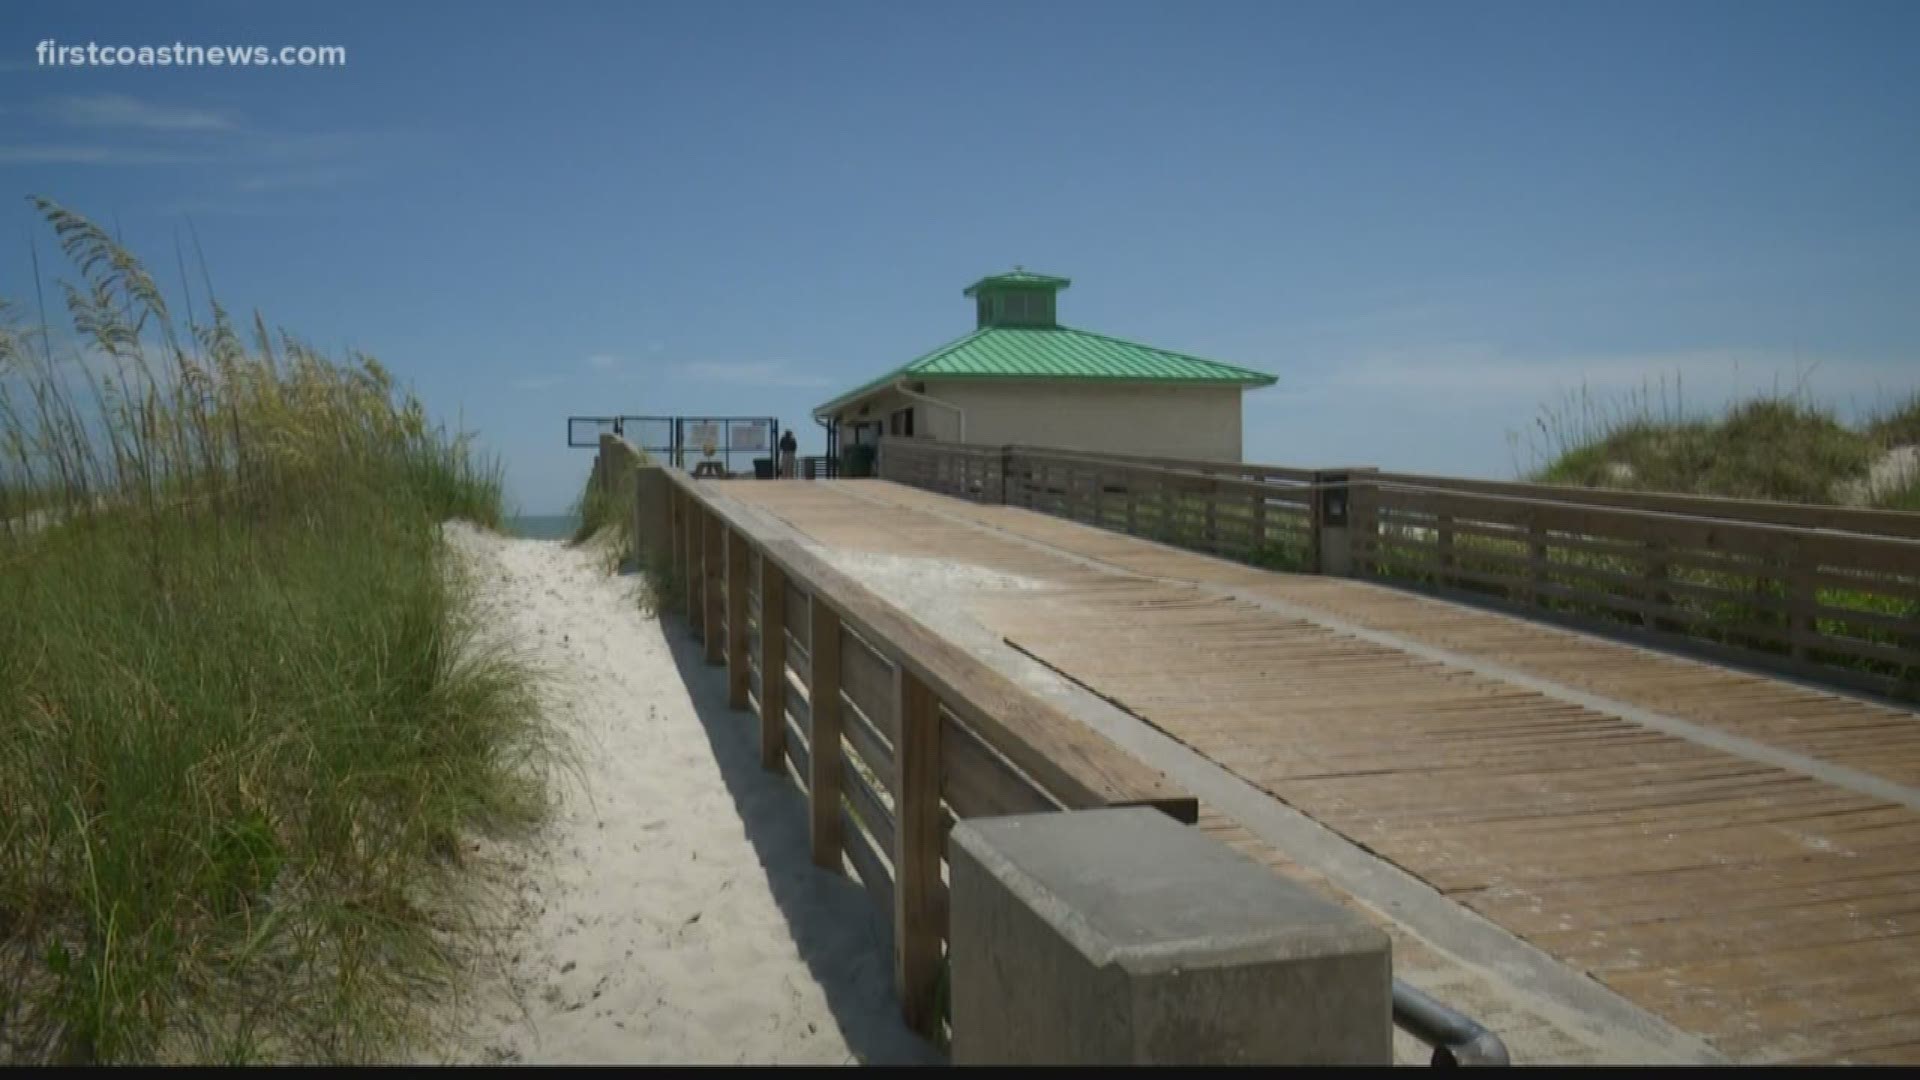 The Jacksonville Beach Pier was damaged during past hurricanes, and parts of it are still closed.